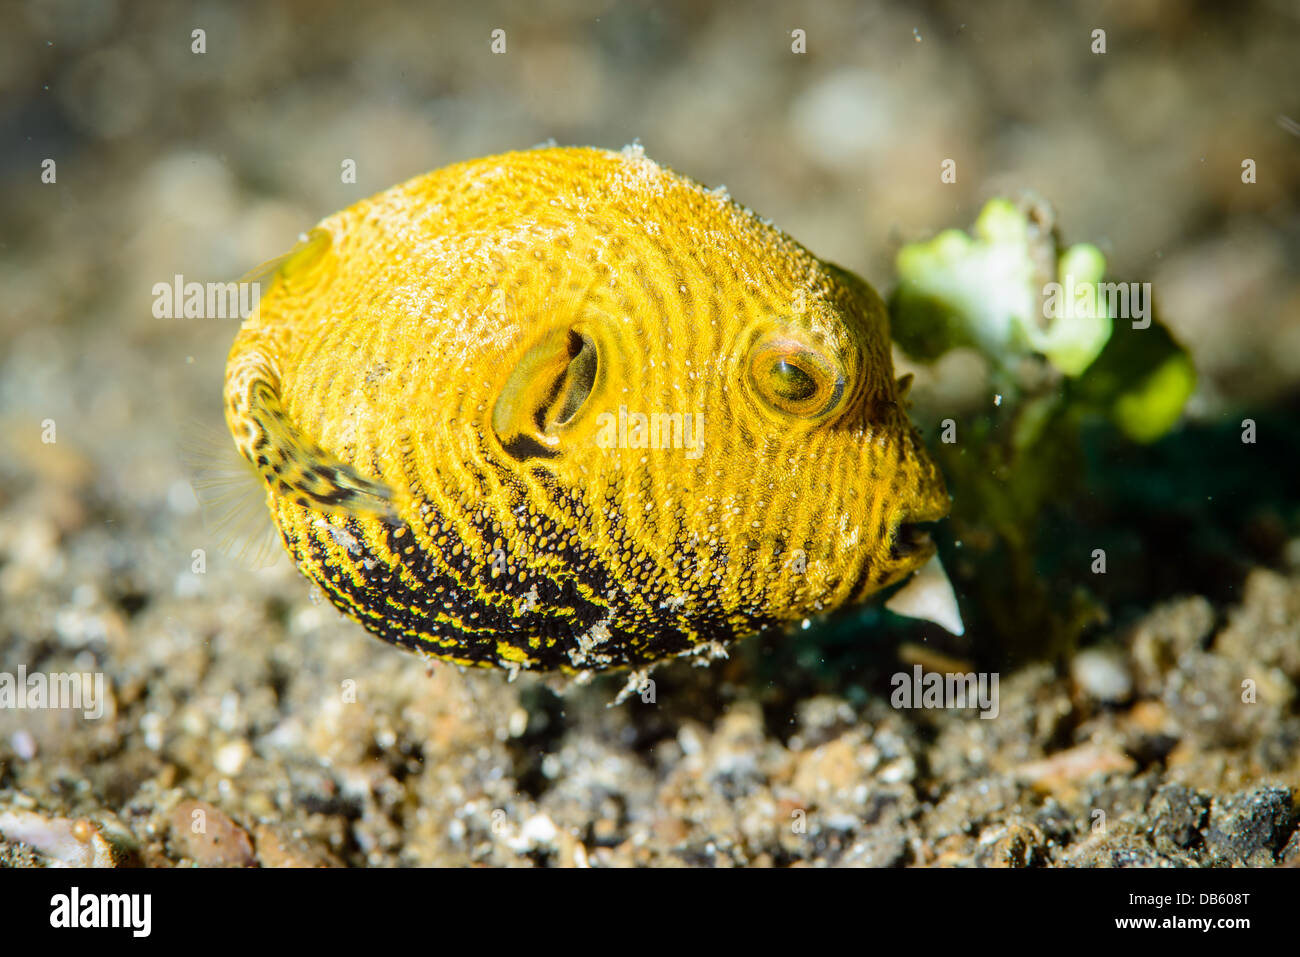 Juvenile yellow puffer fish from the Lembeh Strait Stock Photo